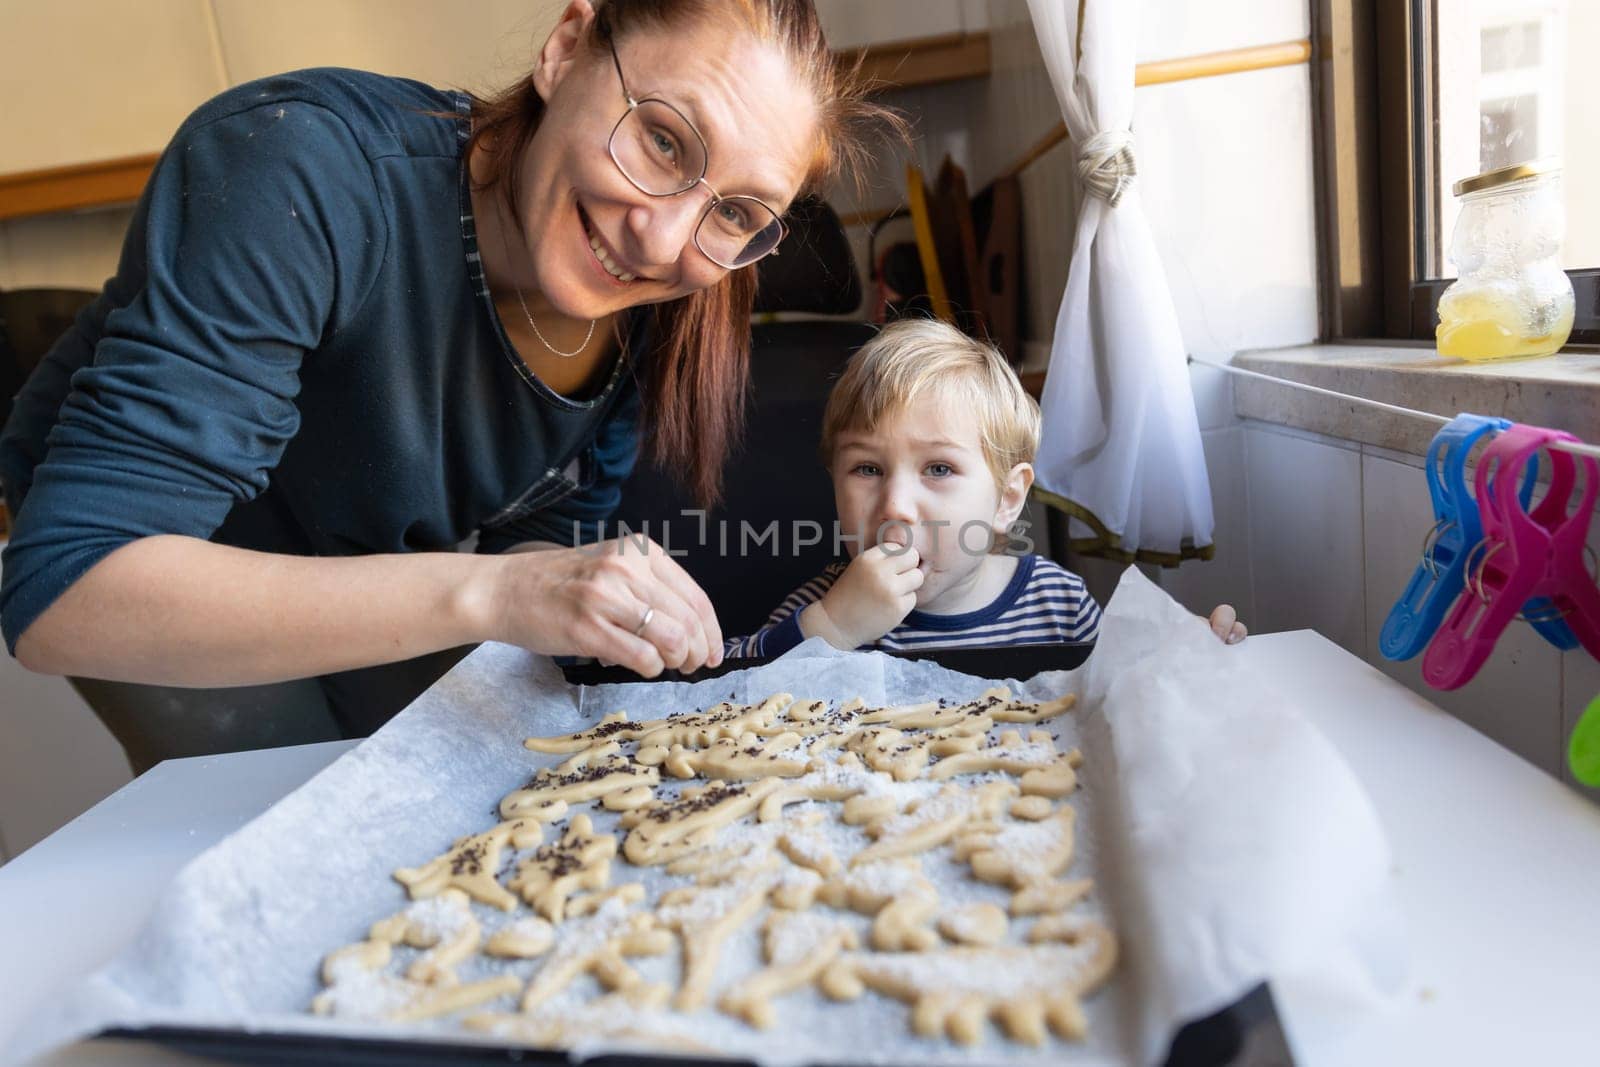 Smiling woman with her little son make cookies in the shape of dinosaurs - looking in the camera. Mid shot